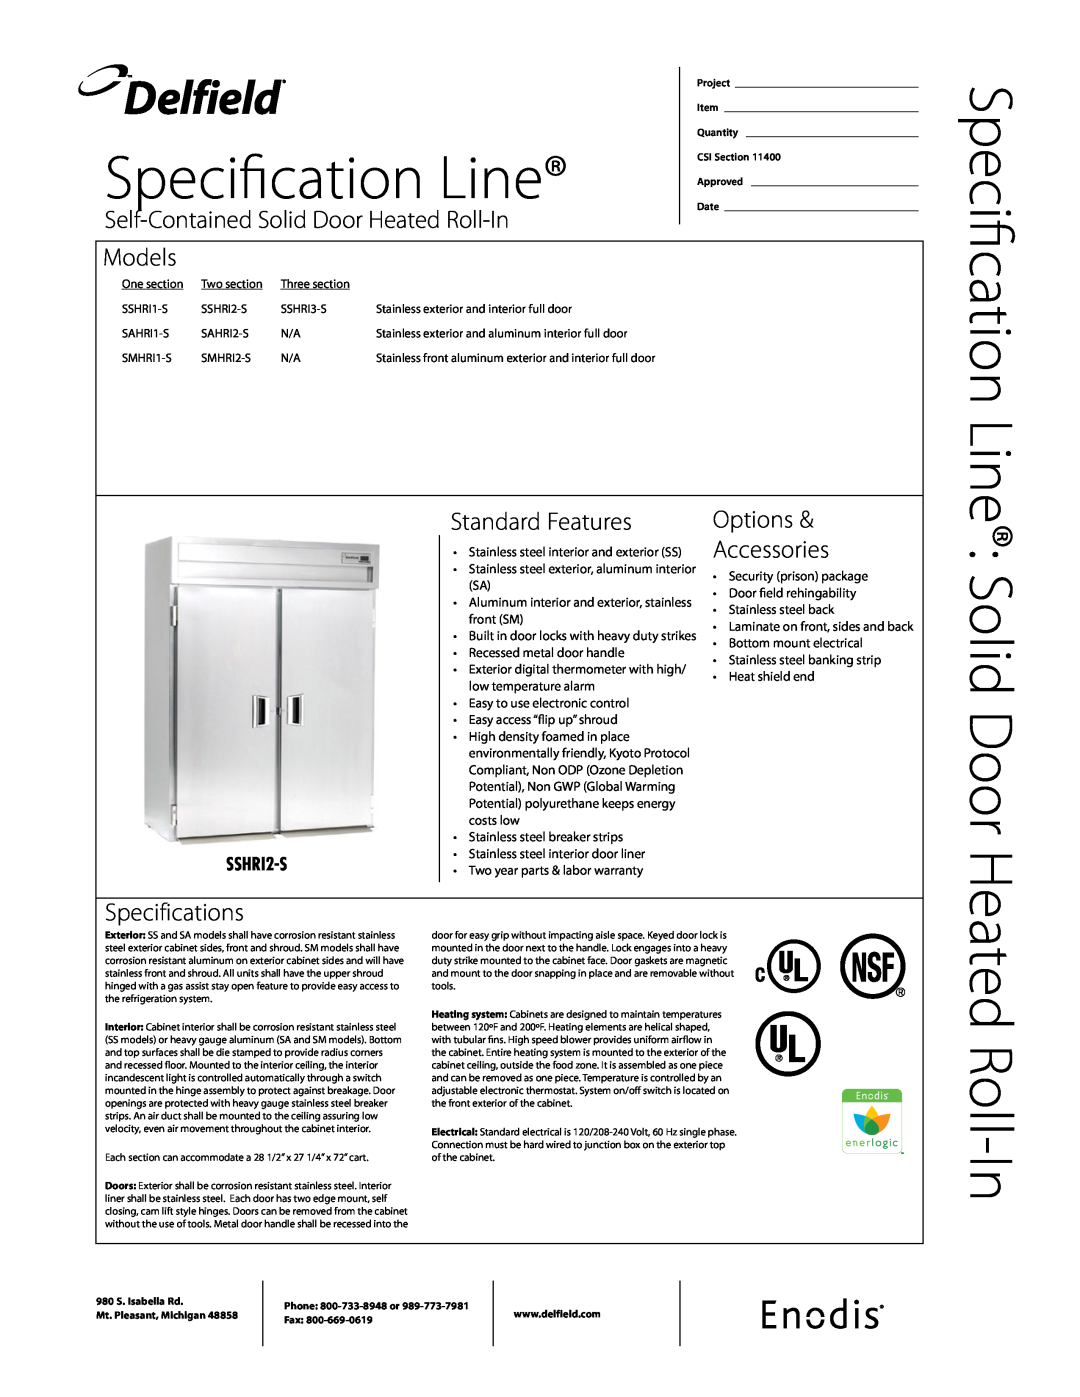 Delfield SMHRI1-S specifications Delfield, Specification Line, Self-ContainedSolid Door Heated Roll-In, Models, SSHRI2-S 